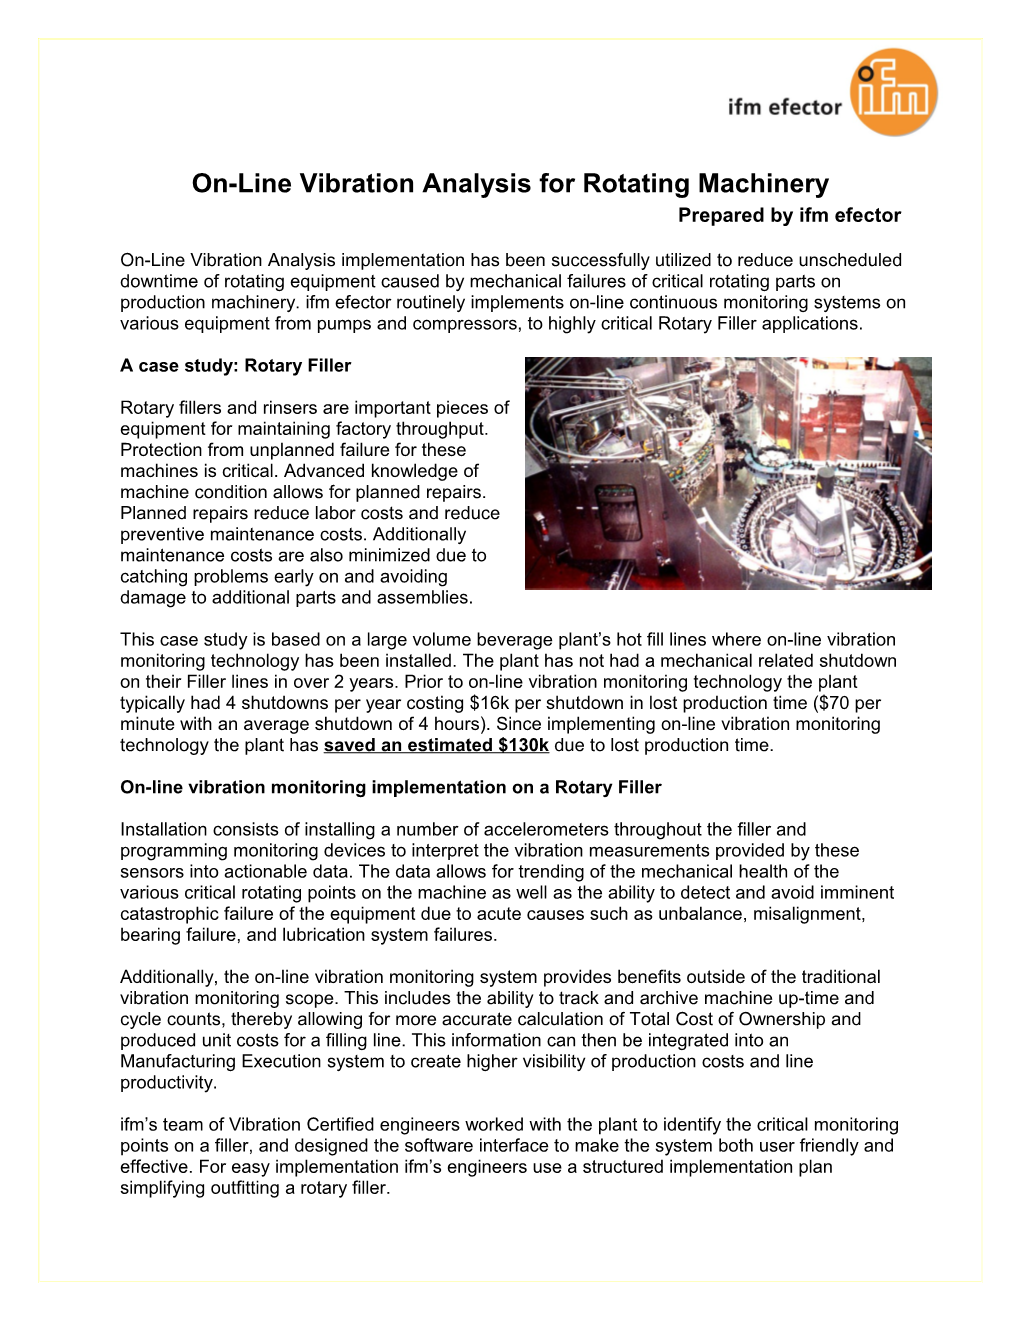 On-Line Vibration Analysis for Rotating Machinery